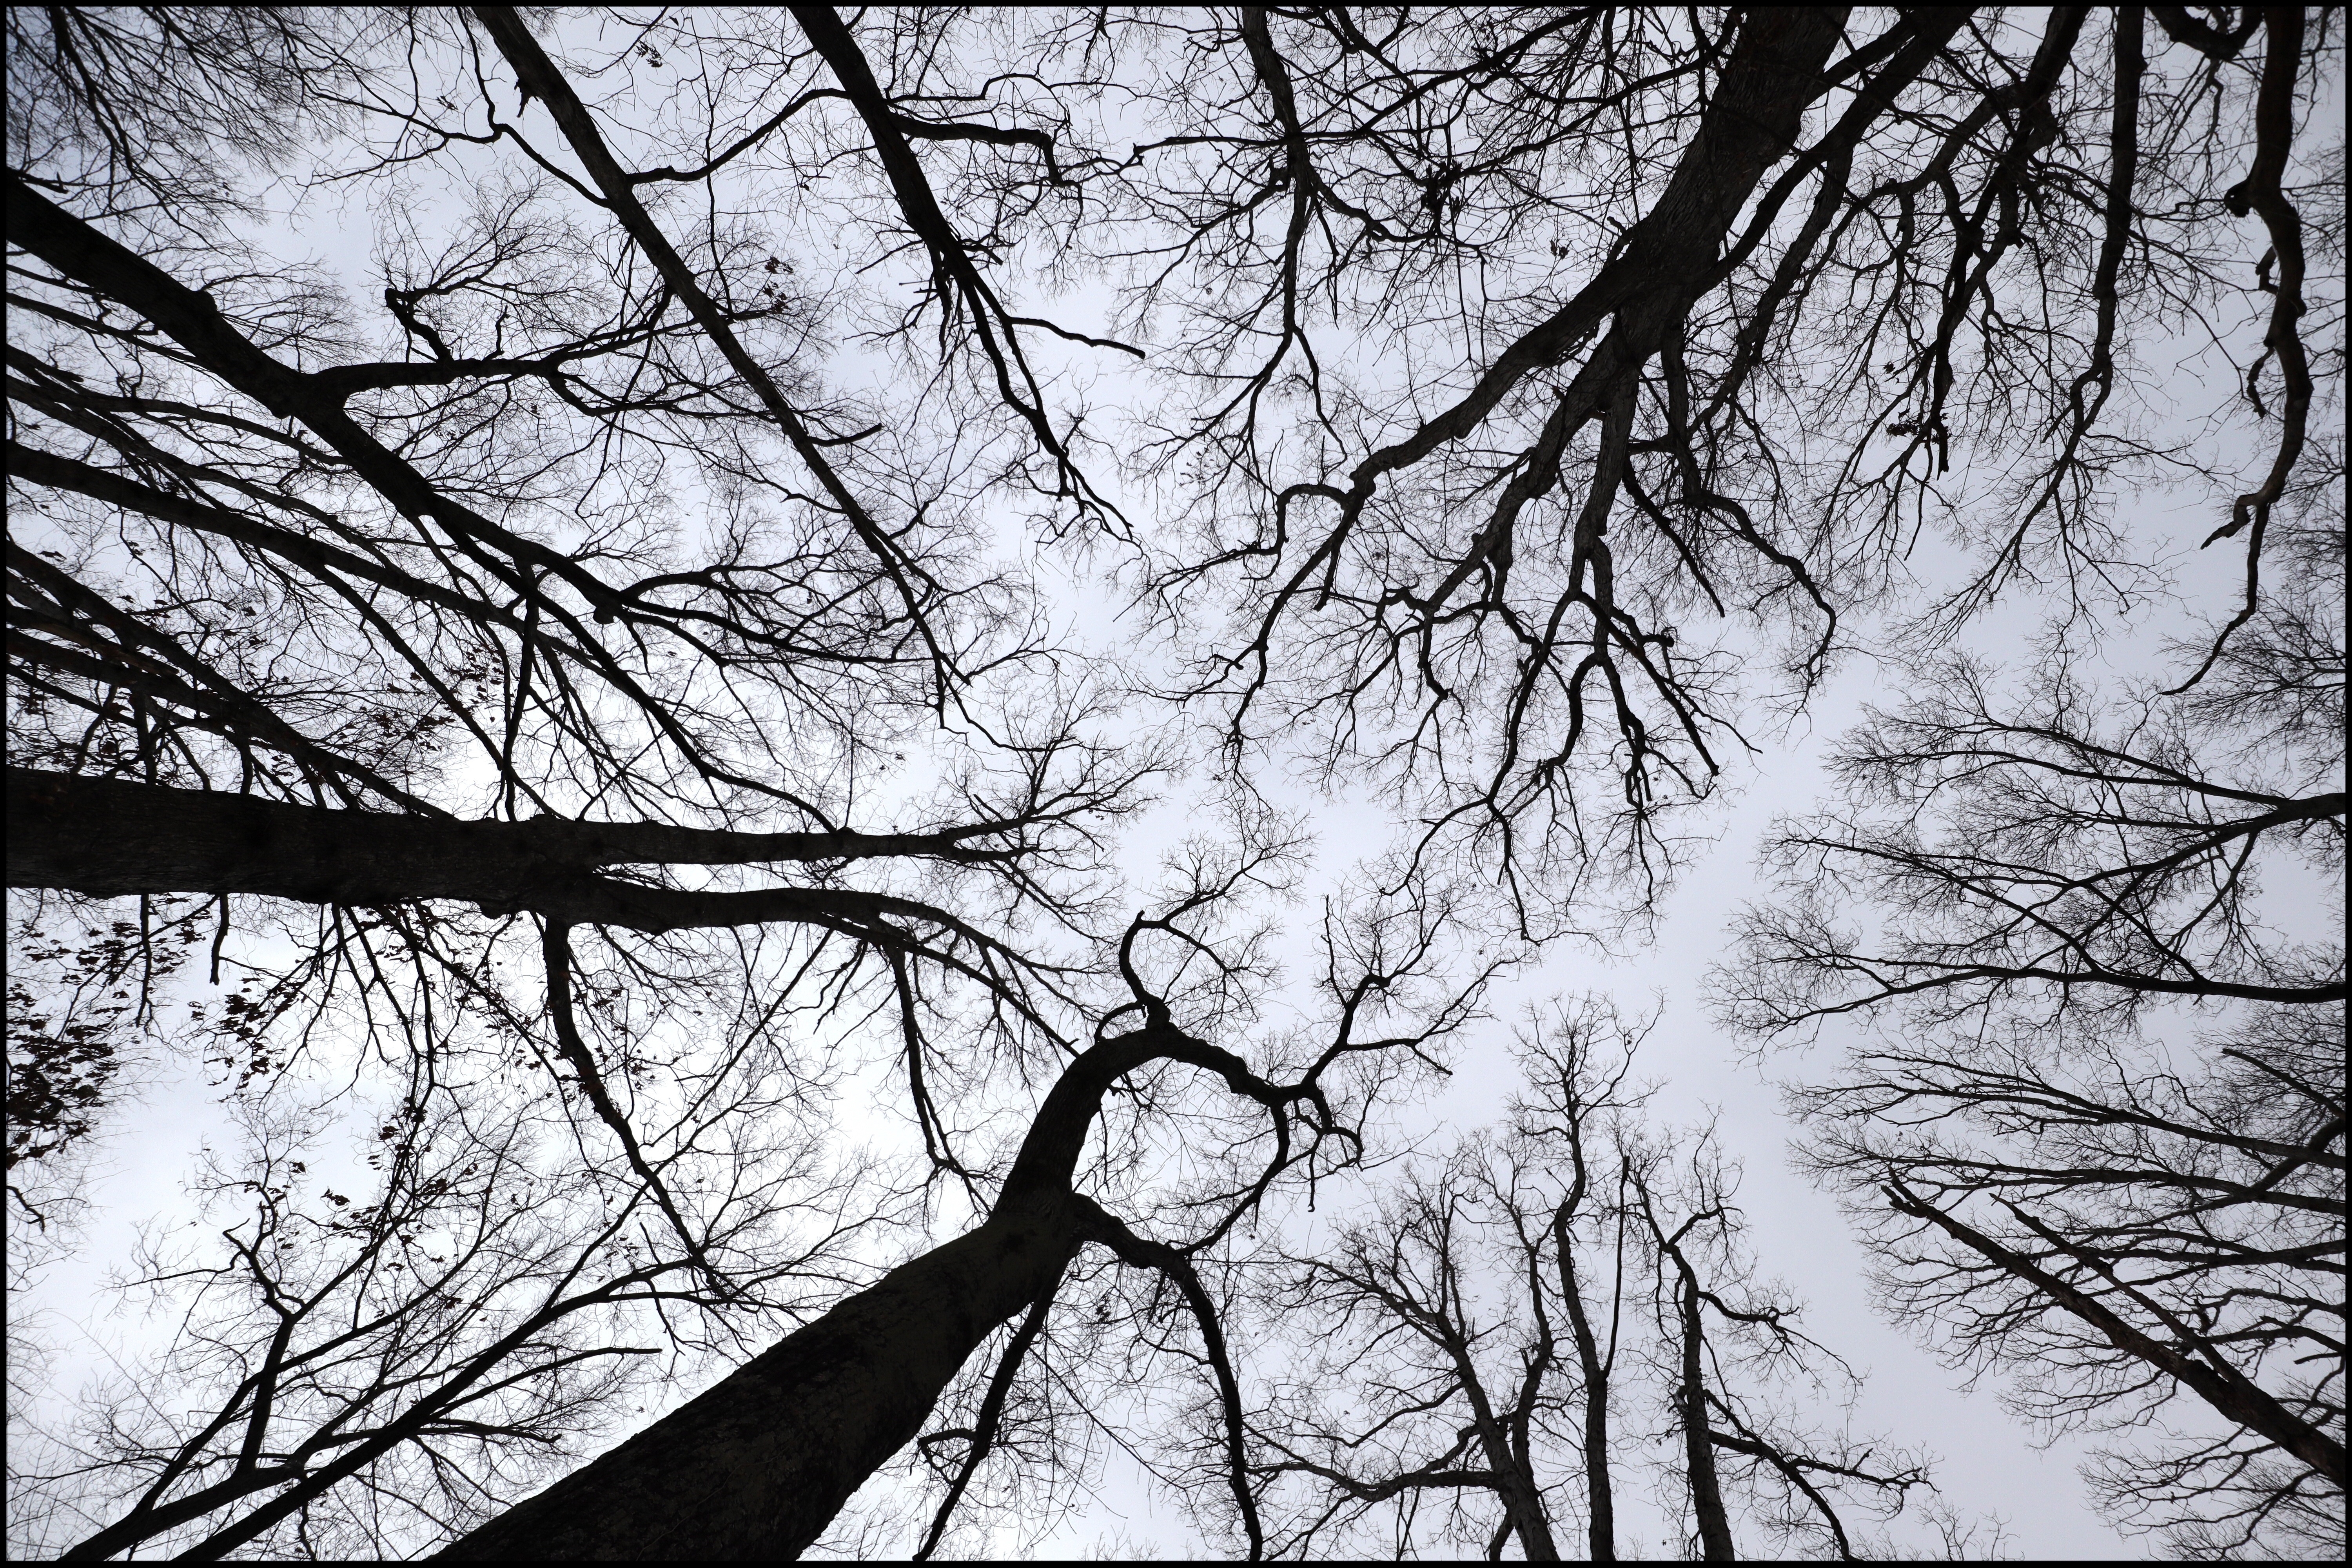 A view of trees in Stadium Woods during winter, with bare branches and shot from the ground looking straight up to the sky.